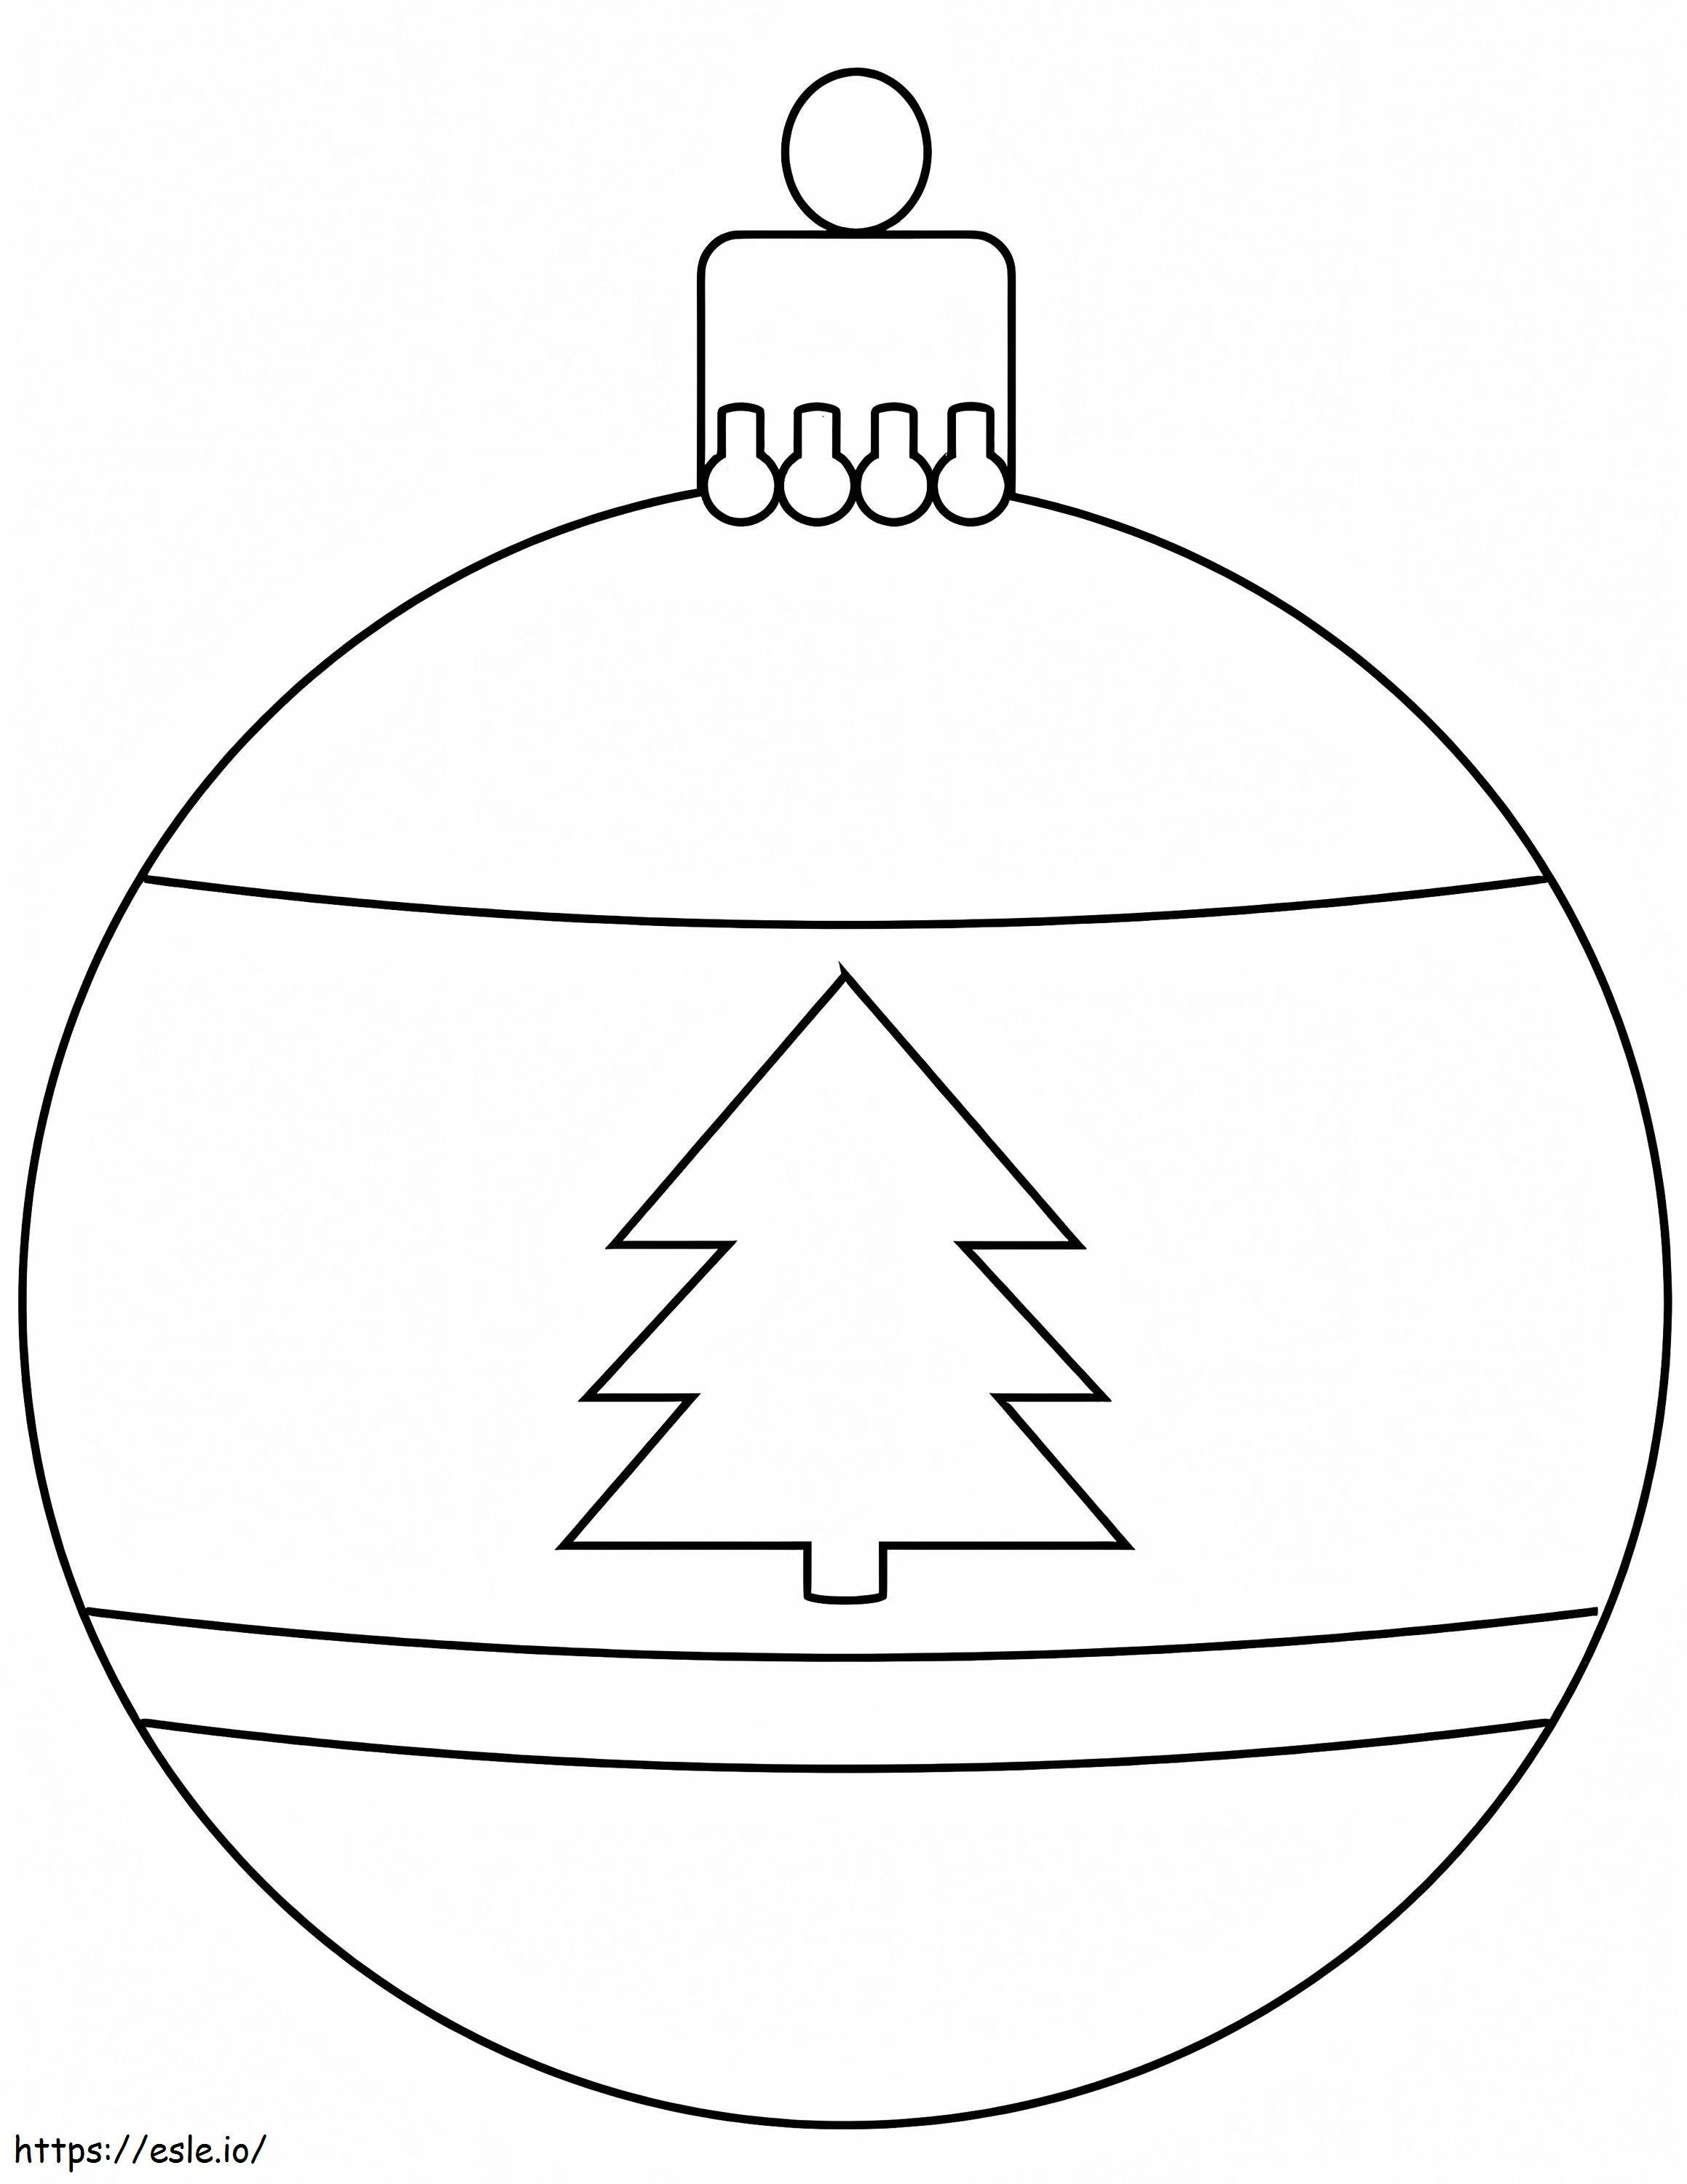 Christmas Bauble Ornament coloring page